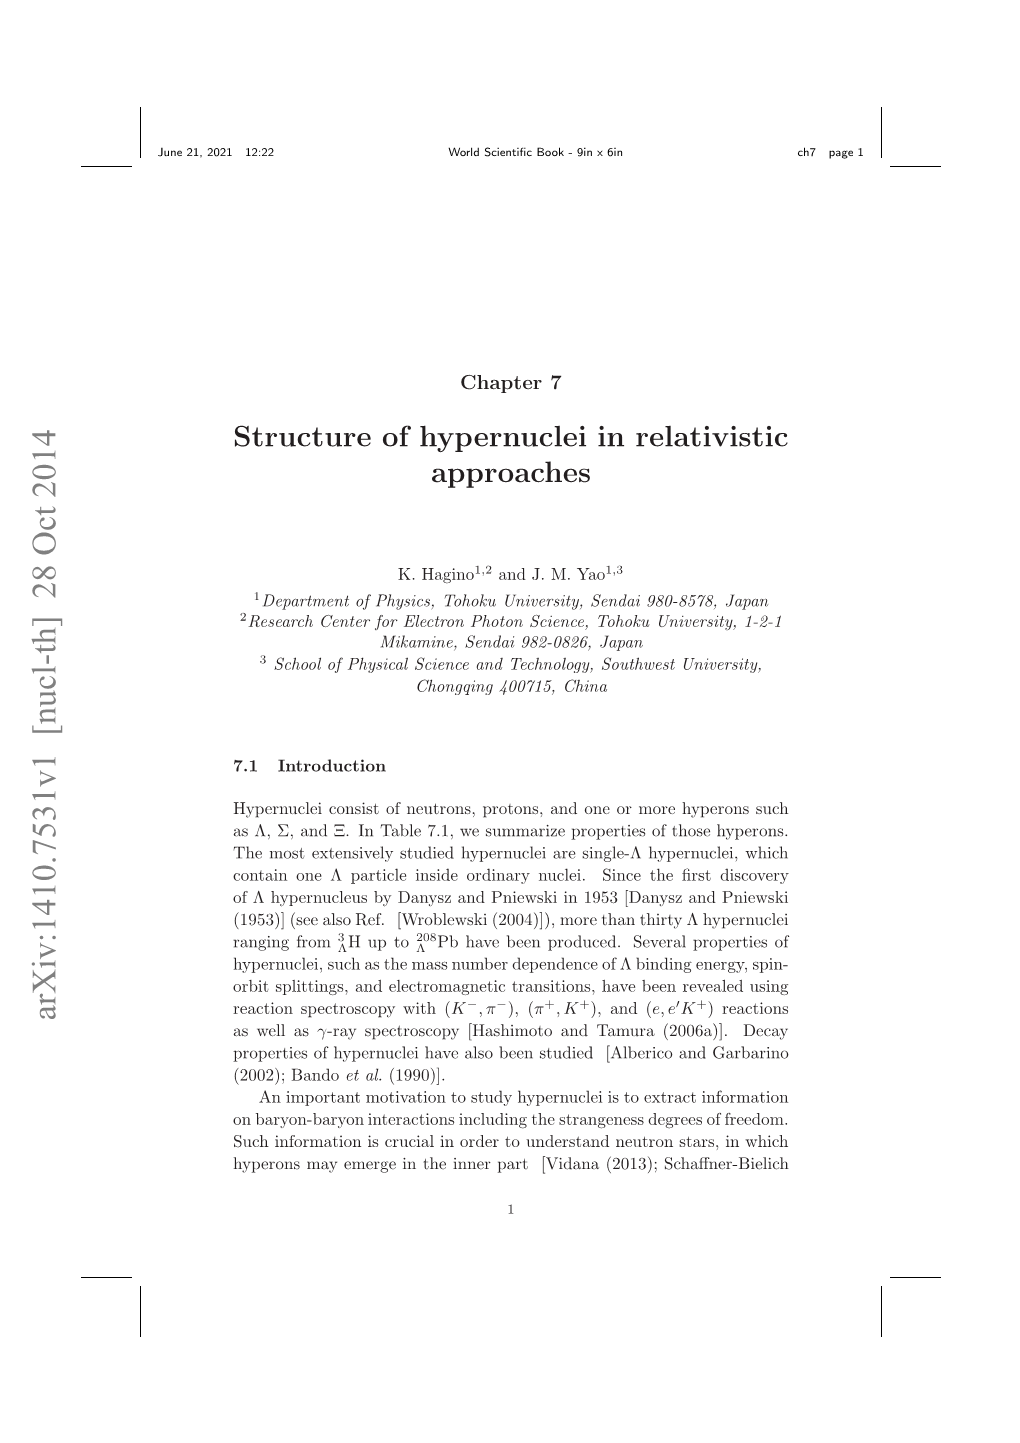 Structure of Hypernuclei in Relativistic Approaches 3